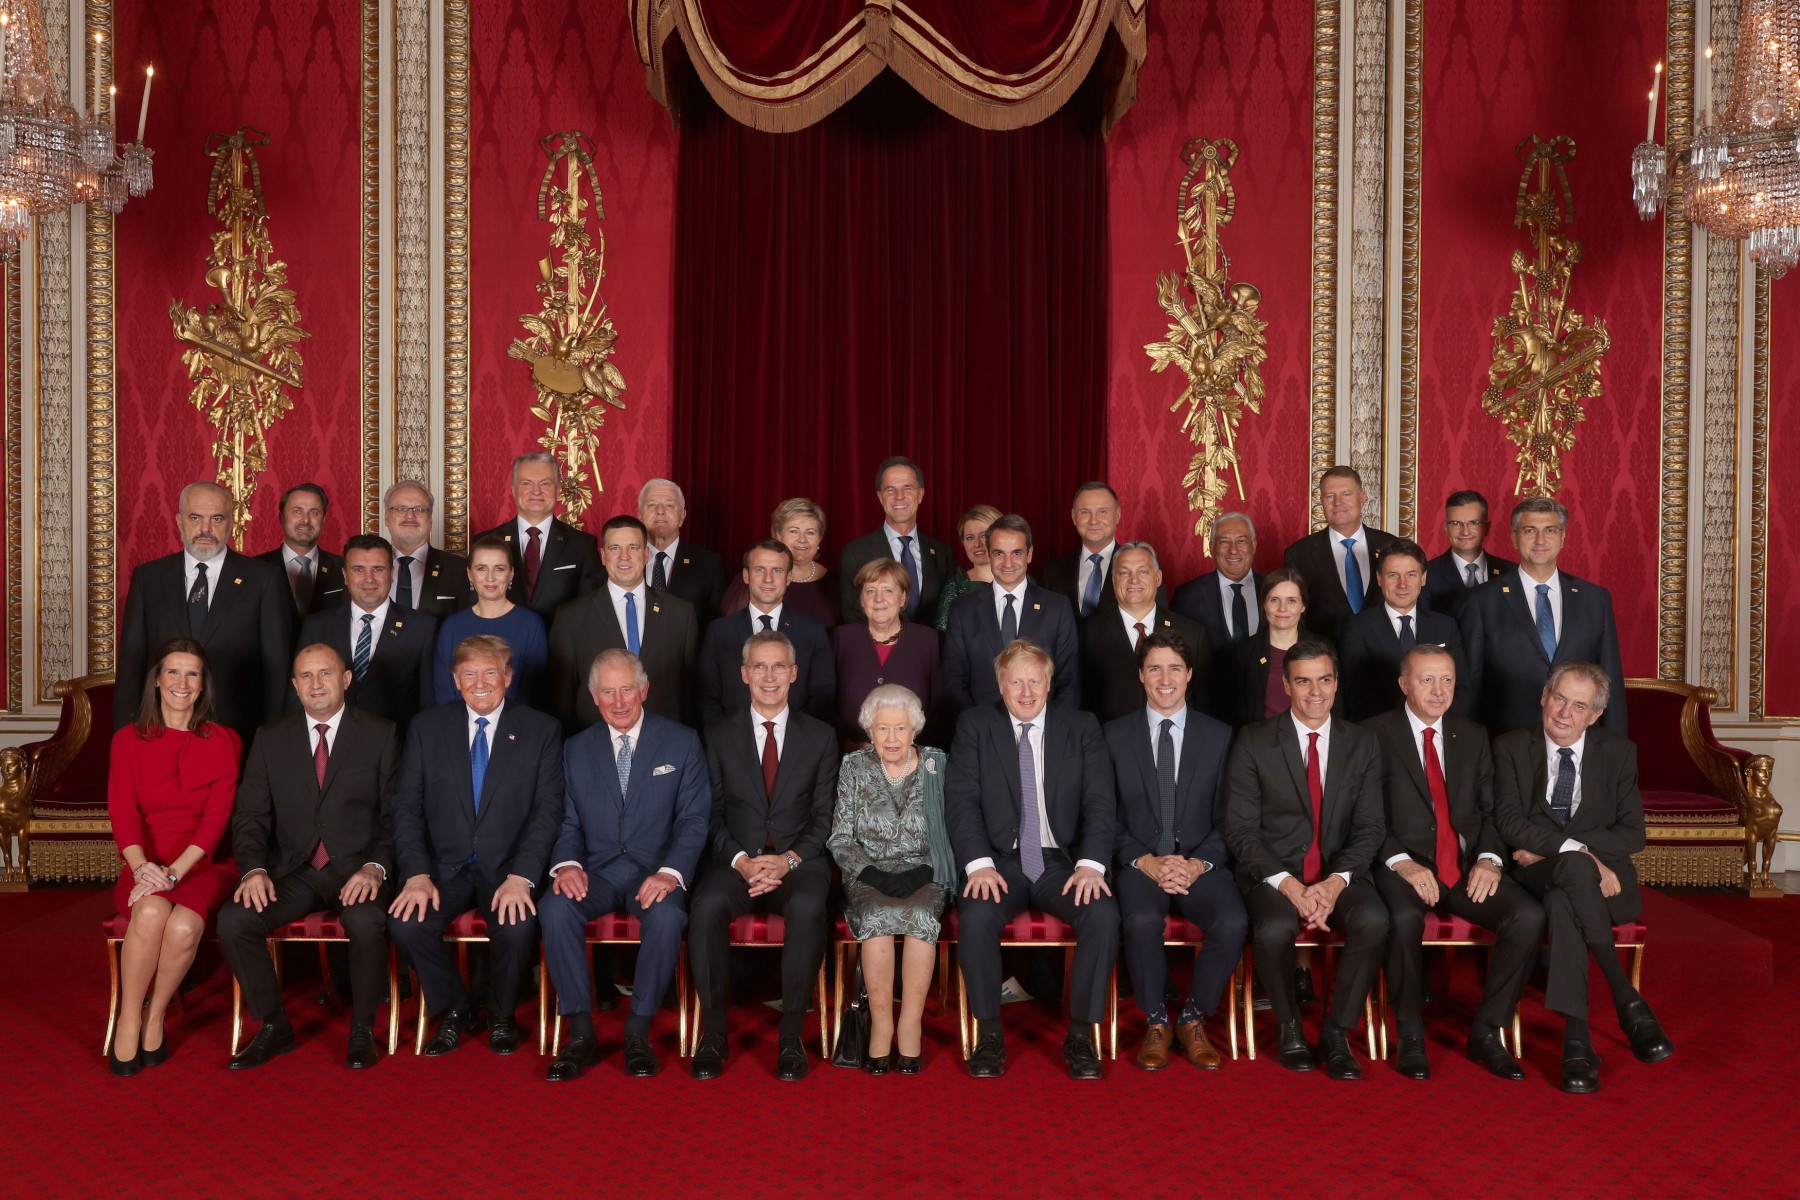 Leaders pose for a group photo at Buckingham Palace